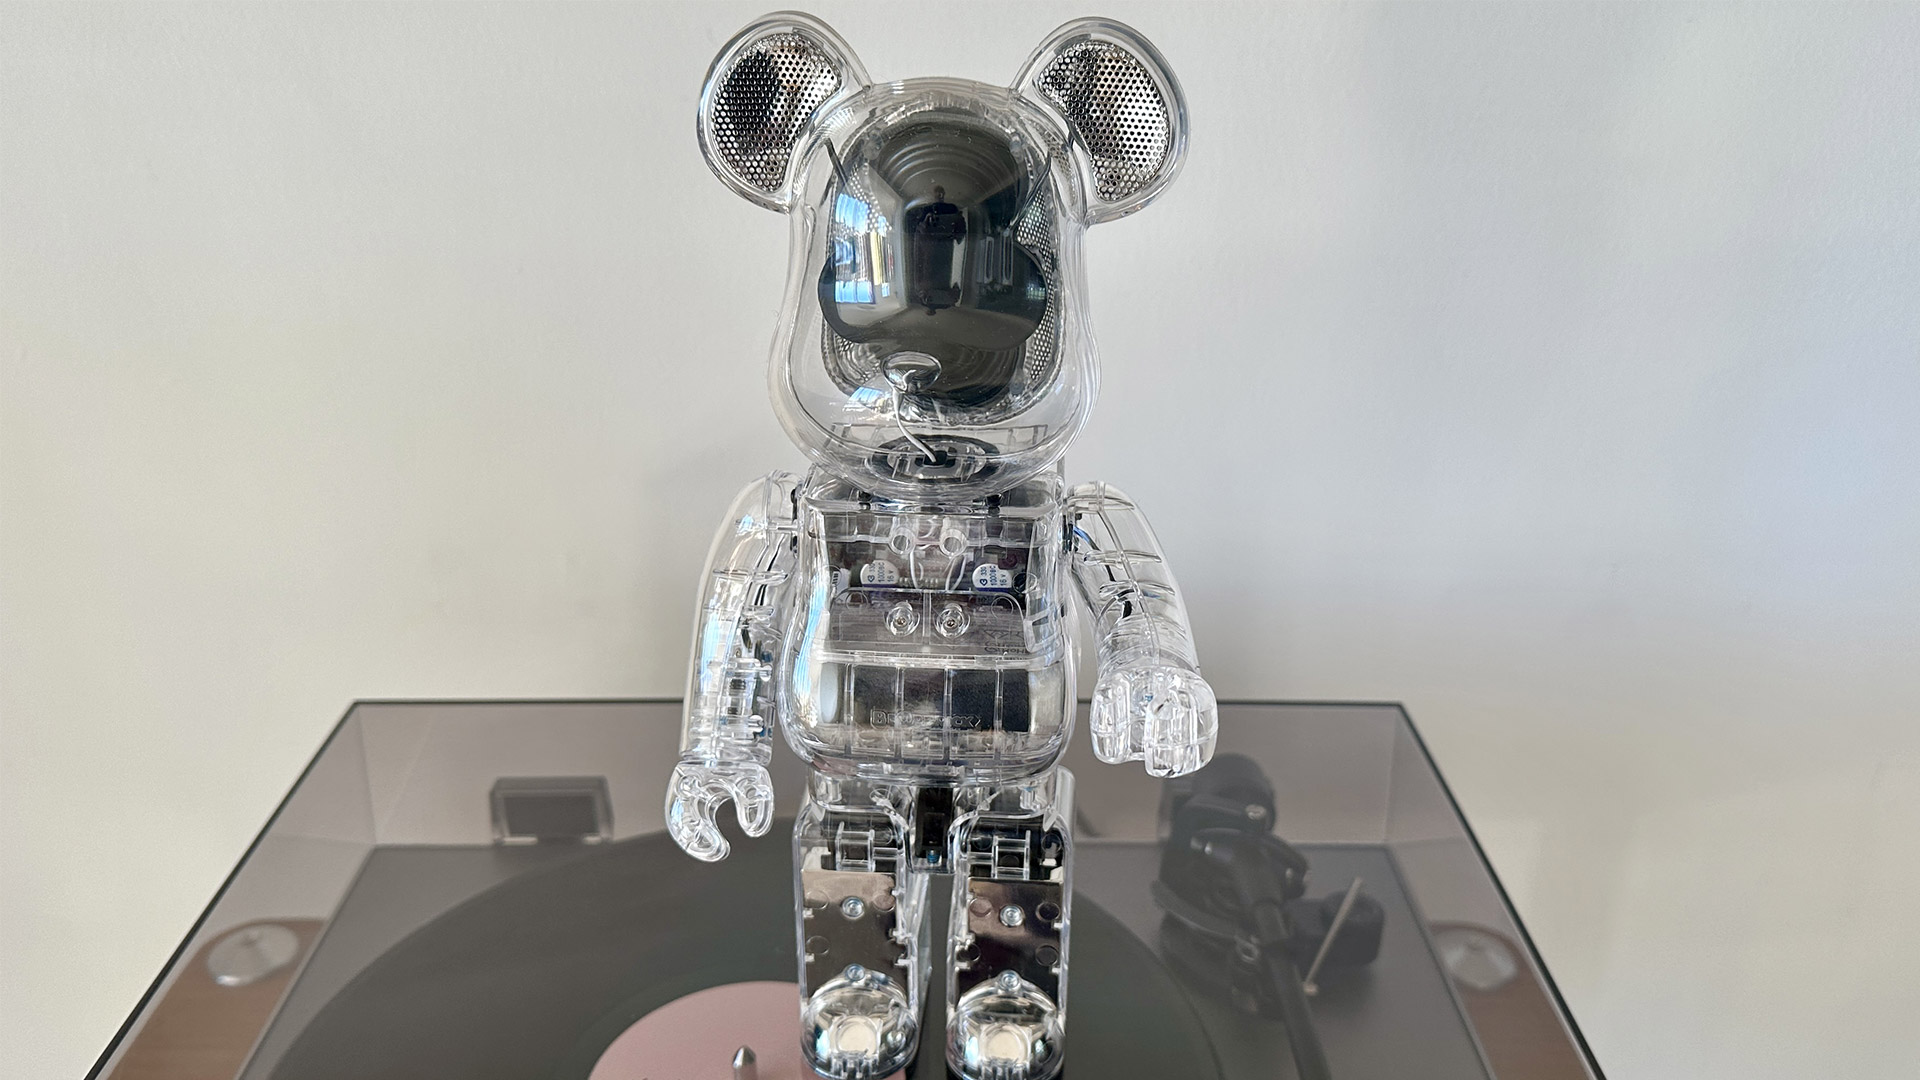 I tried the expensive yet eccentric Bearbrick Bluetooth speaker 